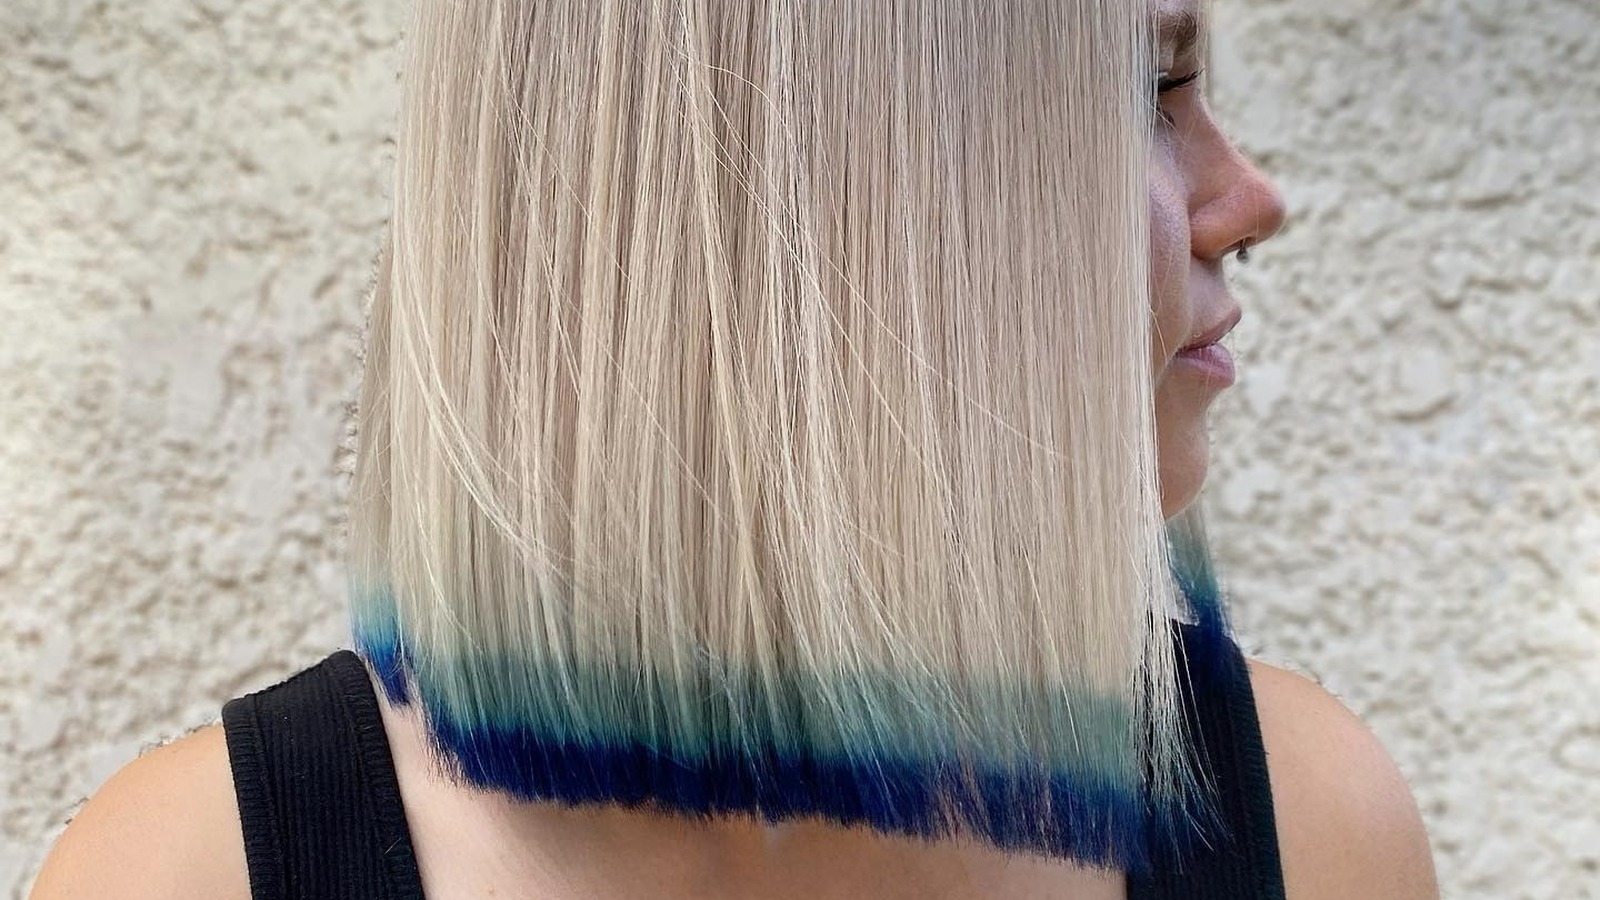 1. "How to Achieve a Stunning Dip Dye Hair Look with Green and Blue Shades" - wide 7